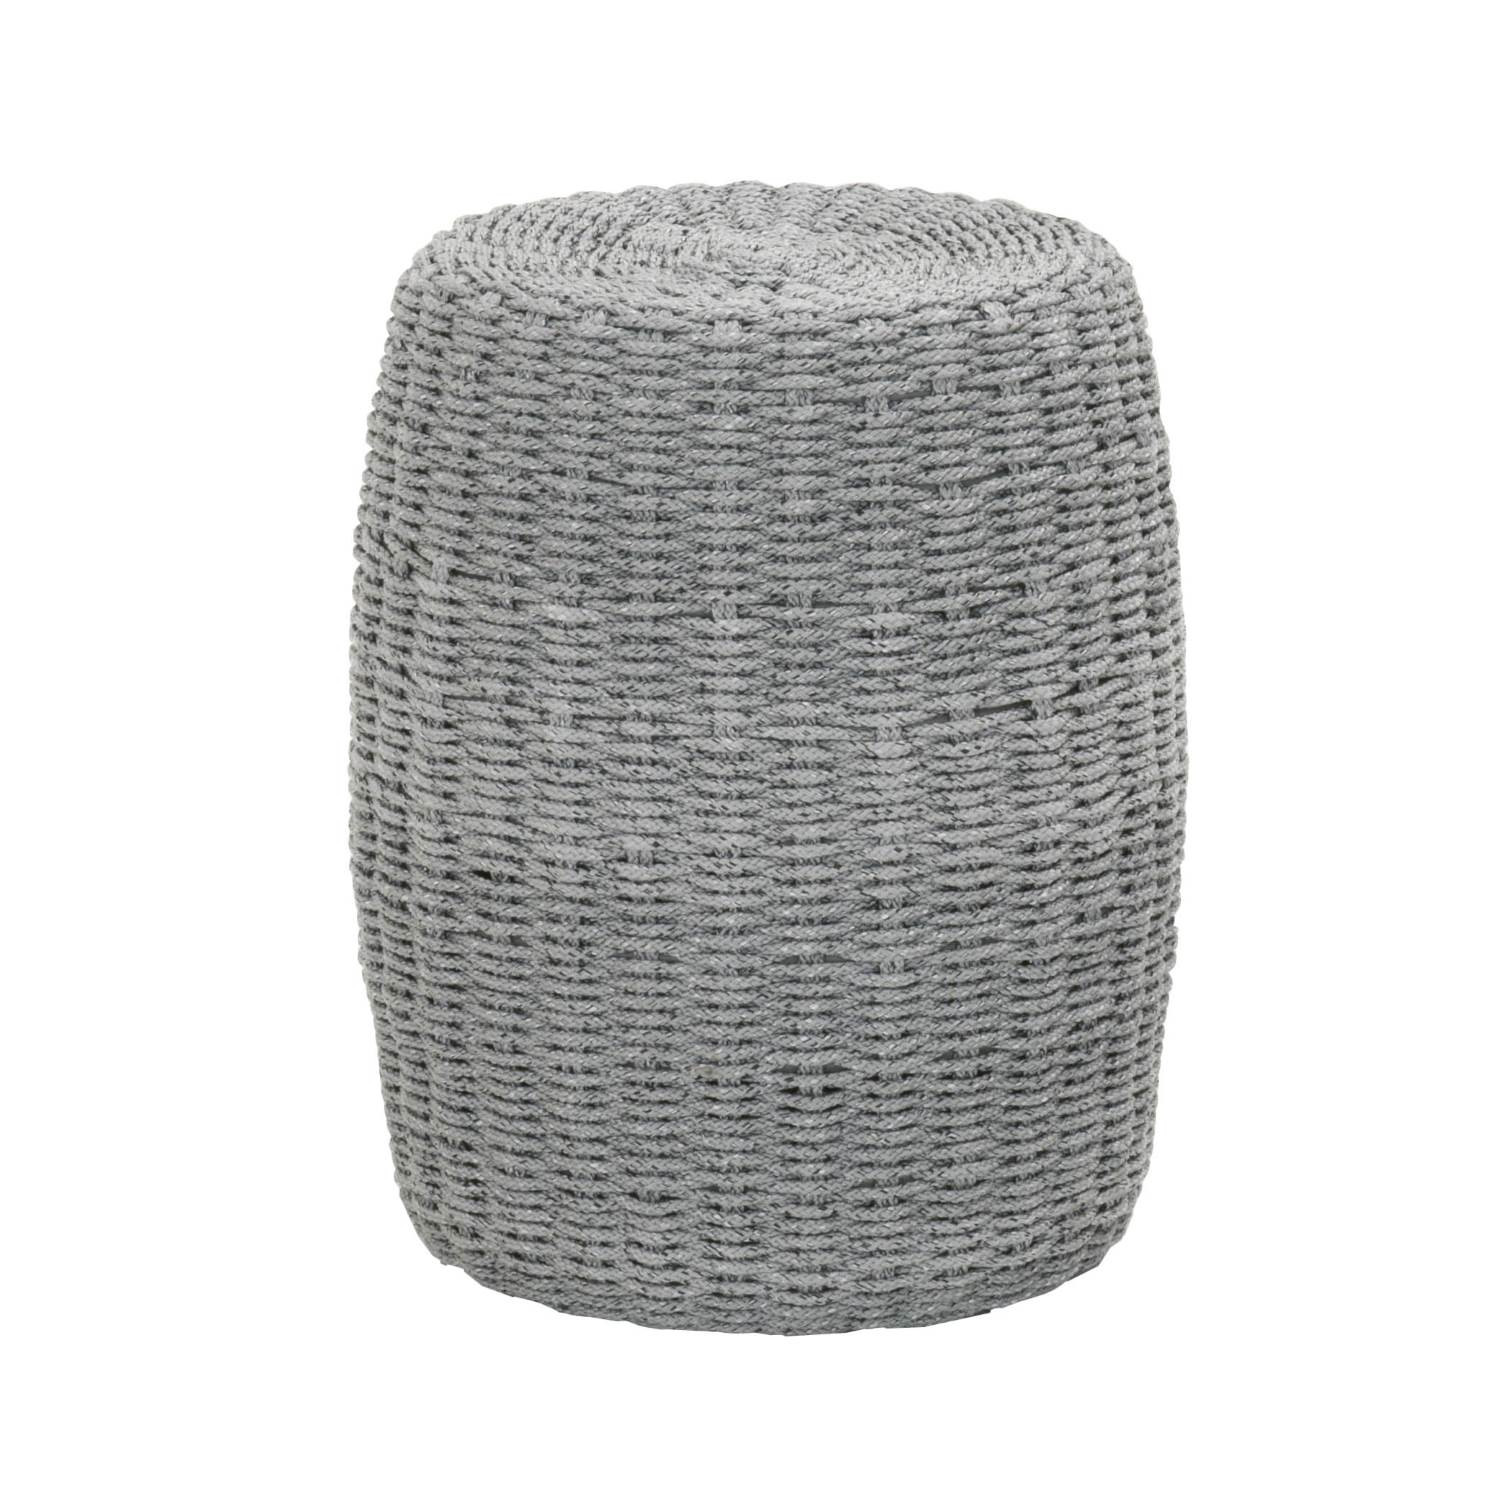 rope weave accent table furniture loom platinum white wicker from belleand adjustable desk chinese garden stool arc lamp contemporary sofa design bunnings outdoor dining clear